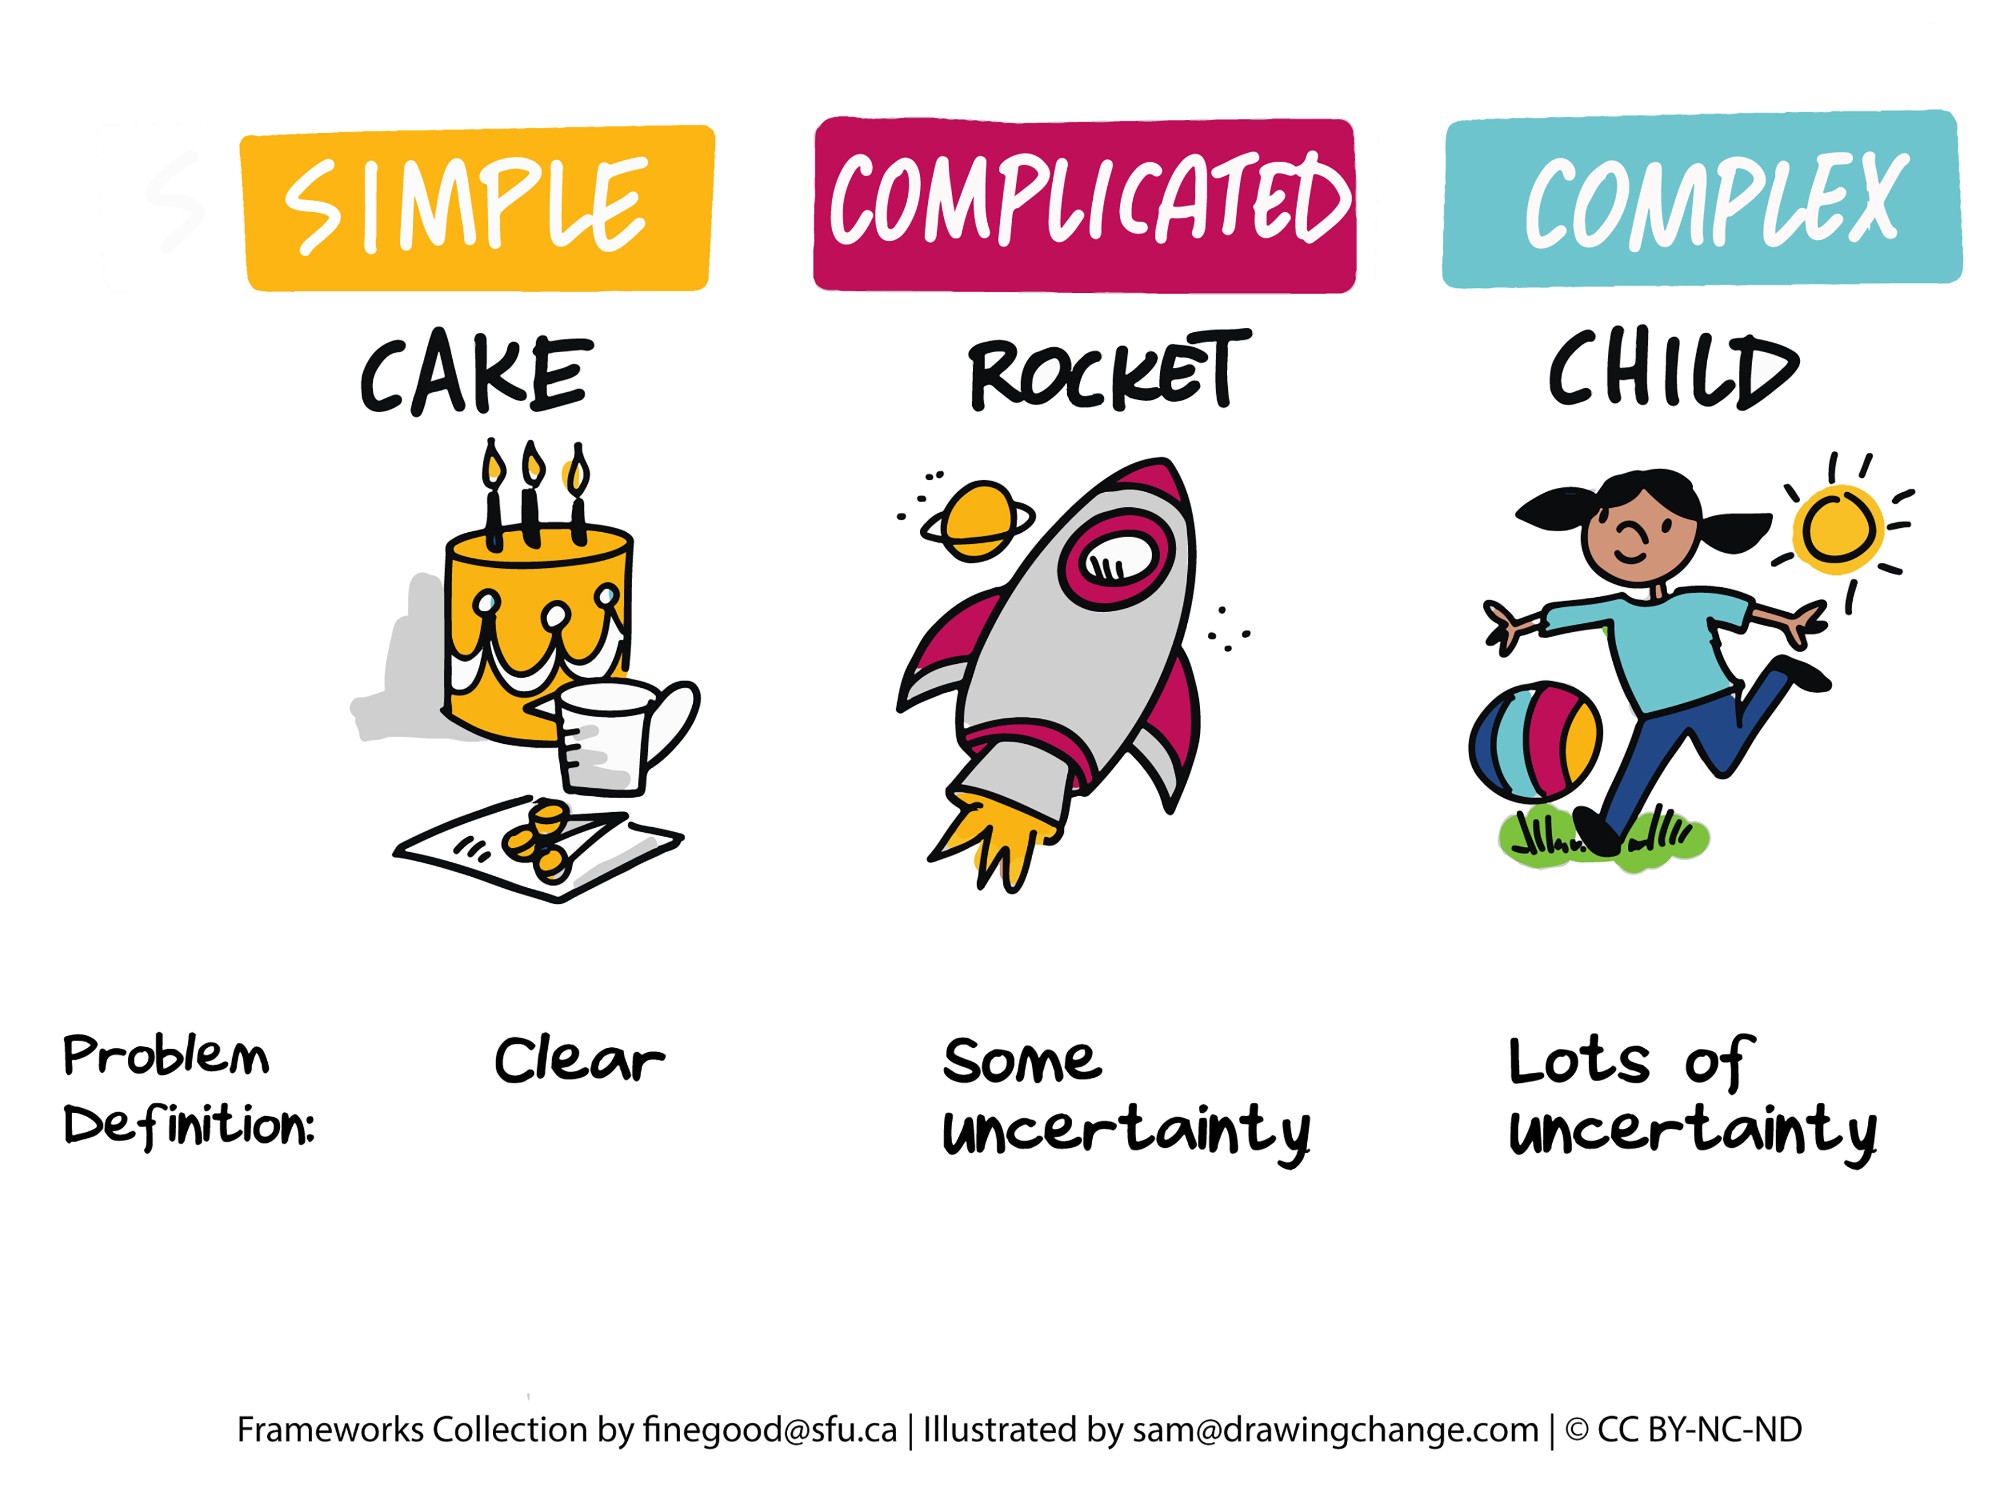 1. The first panel, "Simple," features an illustration of a cake with candles, representing tasks with clear problem definitions, akin to baking a cake where the steps are well-defined and the outcome is predictable.  2. The second panel, "Complicated," shows a cartoon rocket, indicating tasks where the problem definition involves some uncertainty, such as the complexities of engineering and sending a rocket to space, which requires specialized knowledge but can be systematically approached.  3. The third panel, "Complex," includes a drawing of a child playing with a ball under the sun, symbolizing situations where the problem definition comes with lots of uncertainty, resembling the unpredictable nature of raising a child, which requires constant adaptation and cannot be addressed with a fixed formula.  Beneath each illustration, the level of problem definition is noted, emphasizing the progression from clear, to some uncertainty, to lots of uncertainty, as we move from simple to complex tasks.